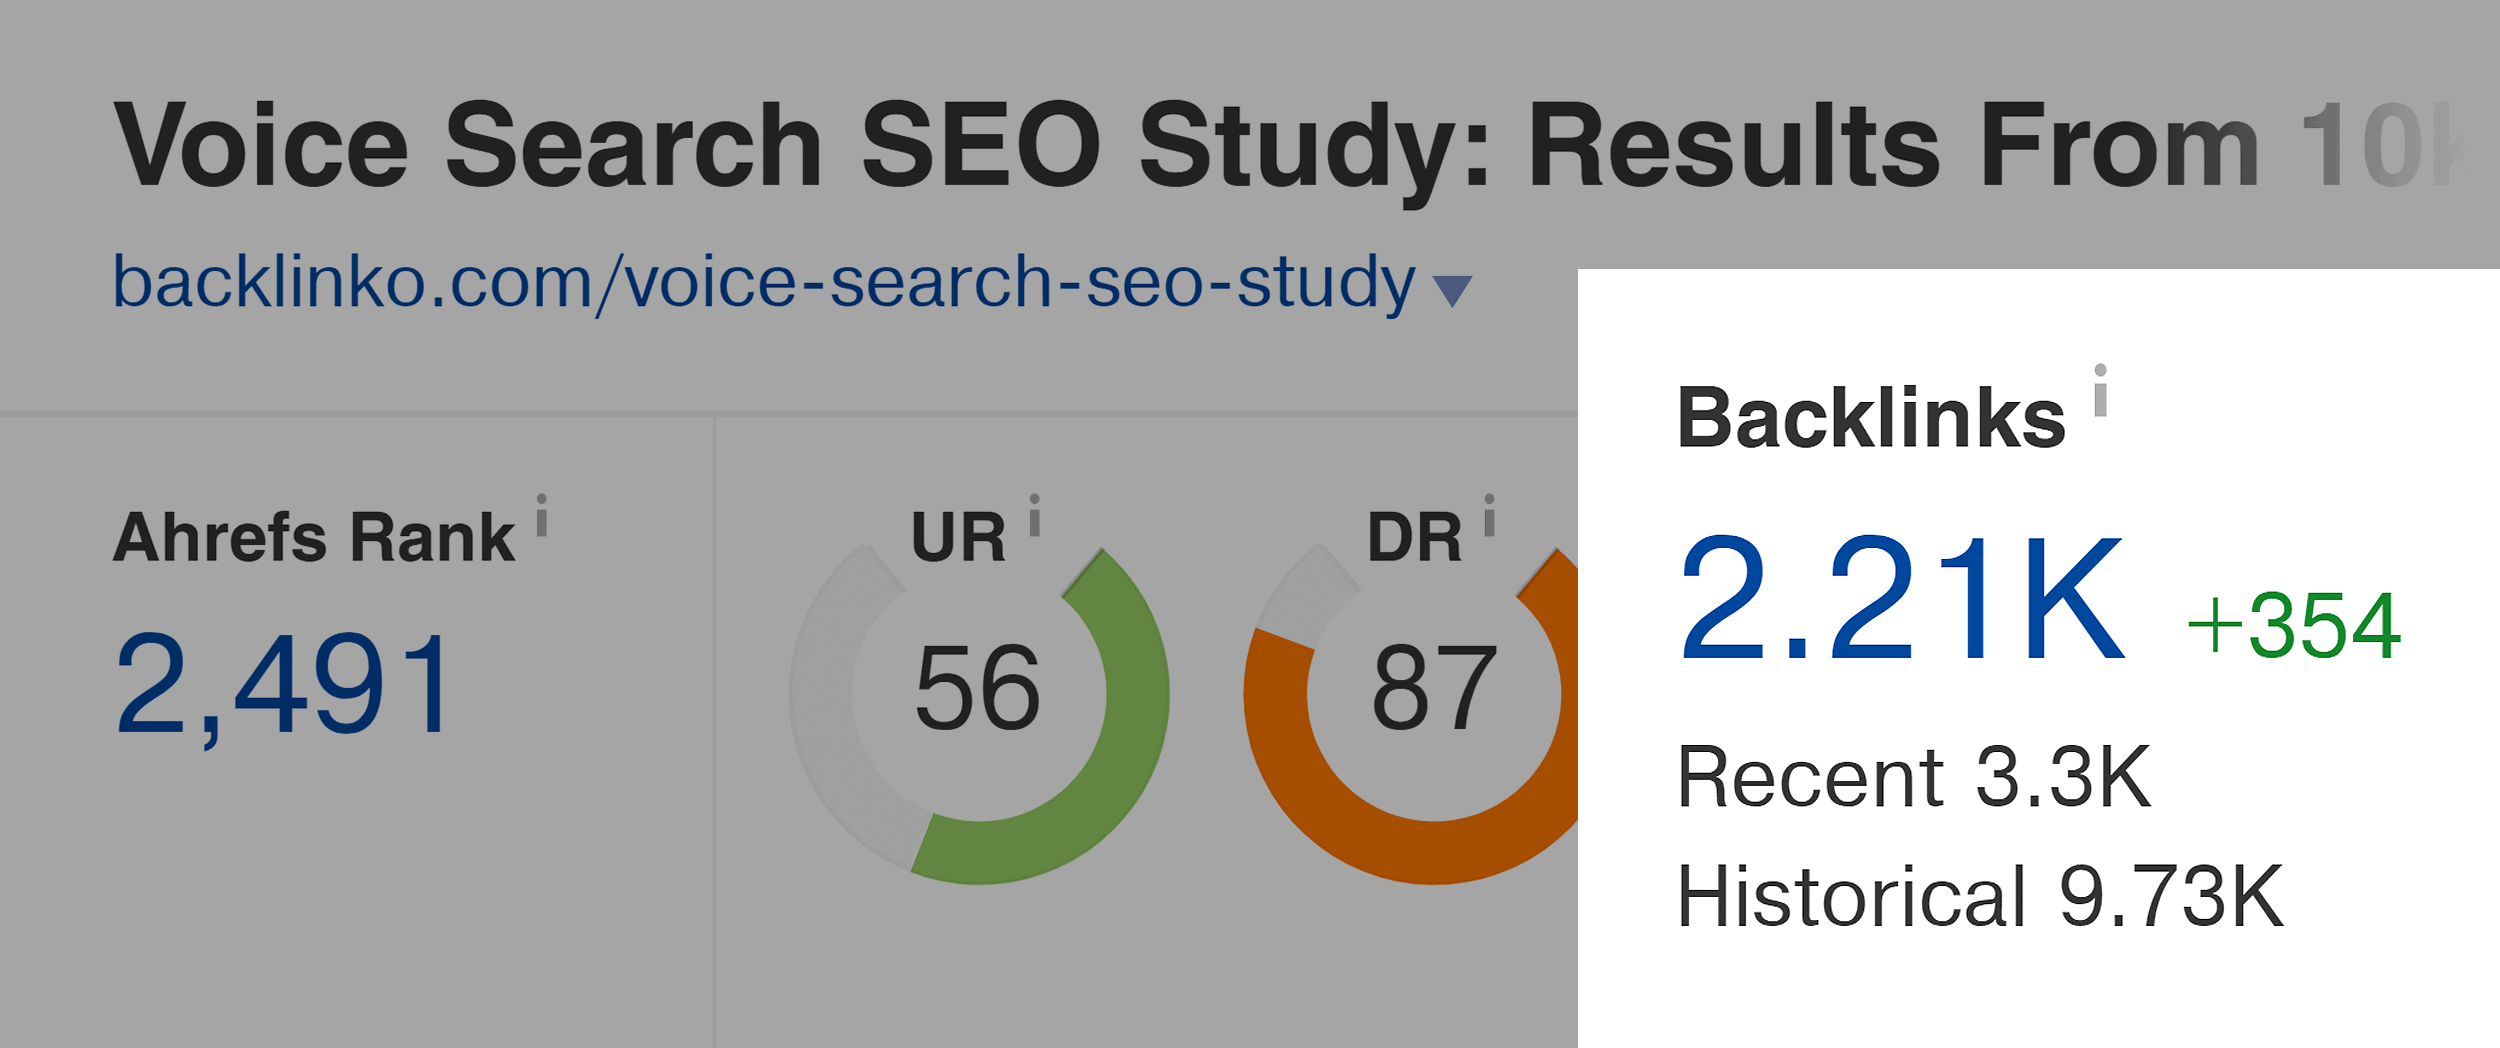 Voice Search SEO Study Backlinks